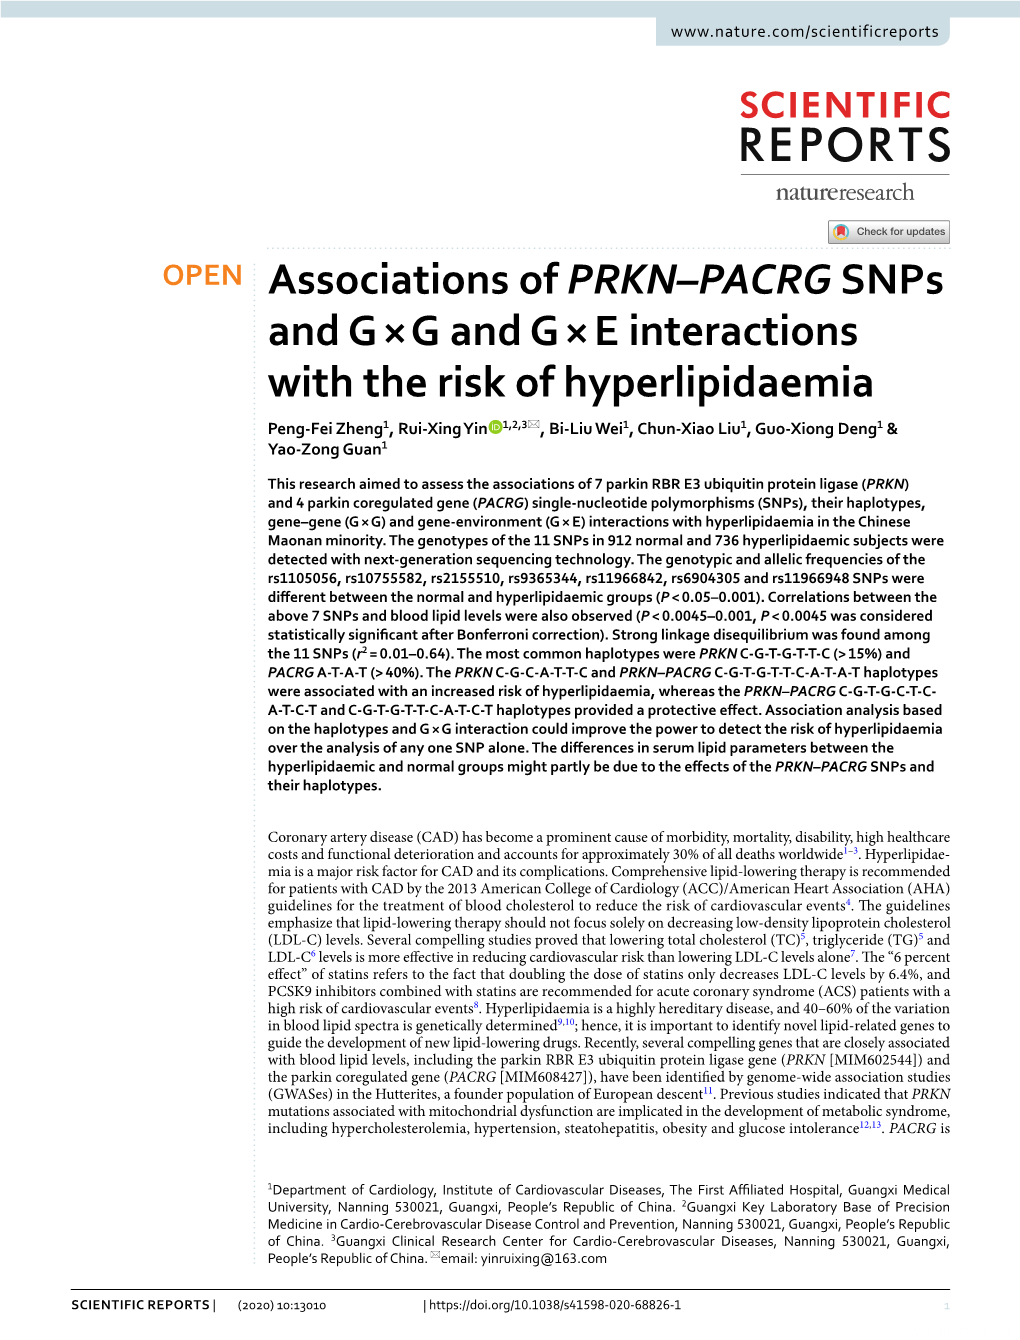 Associations of PRKN–PACRG Snps and G × G and G × E Interactions